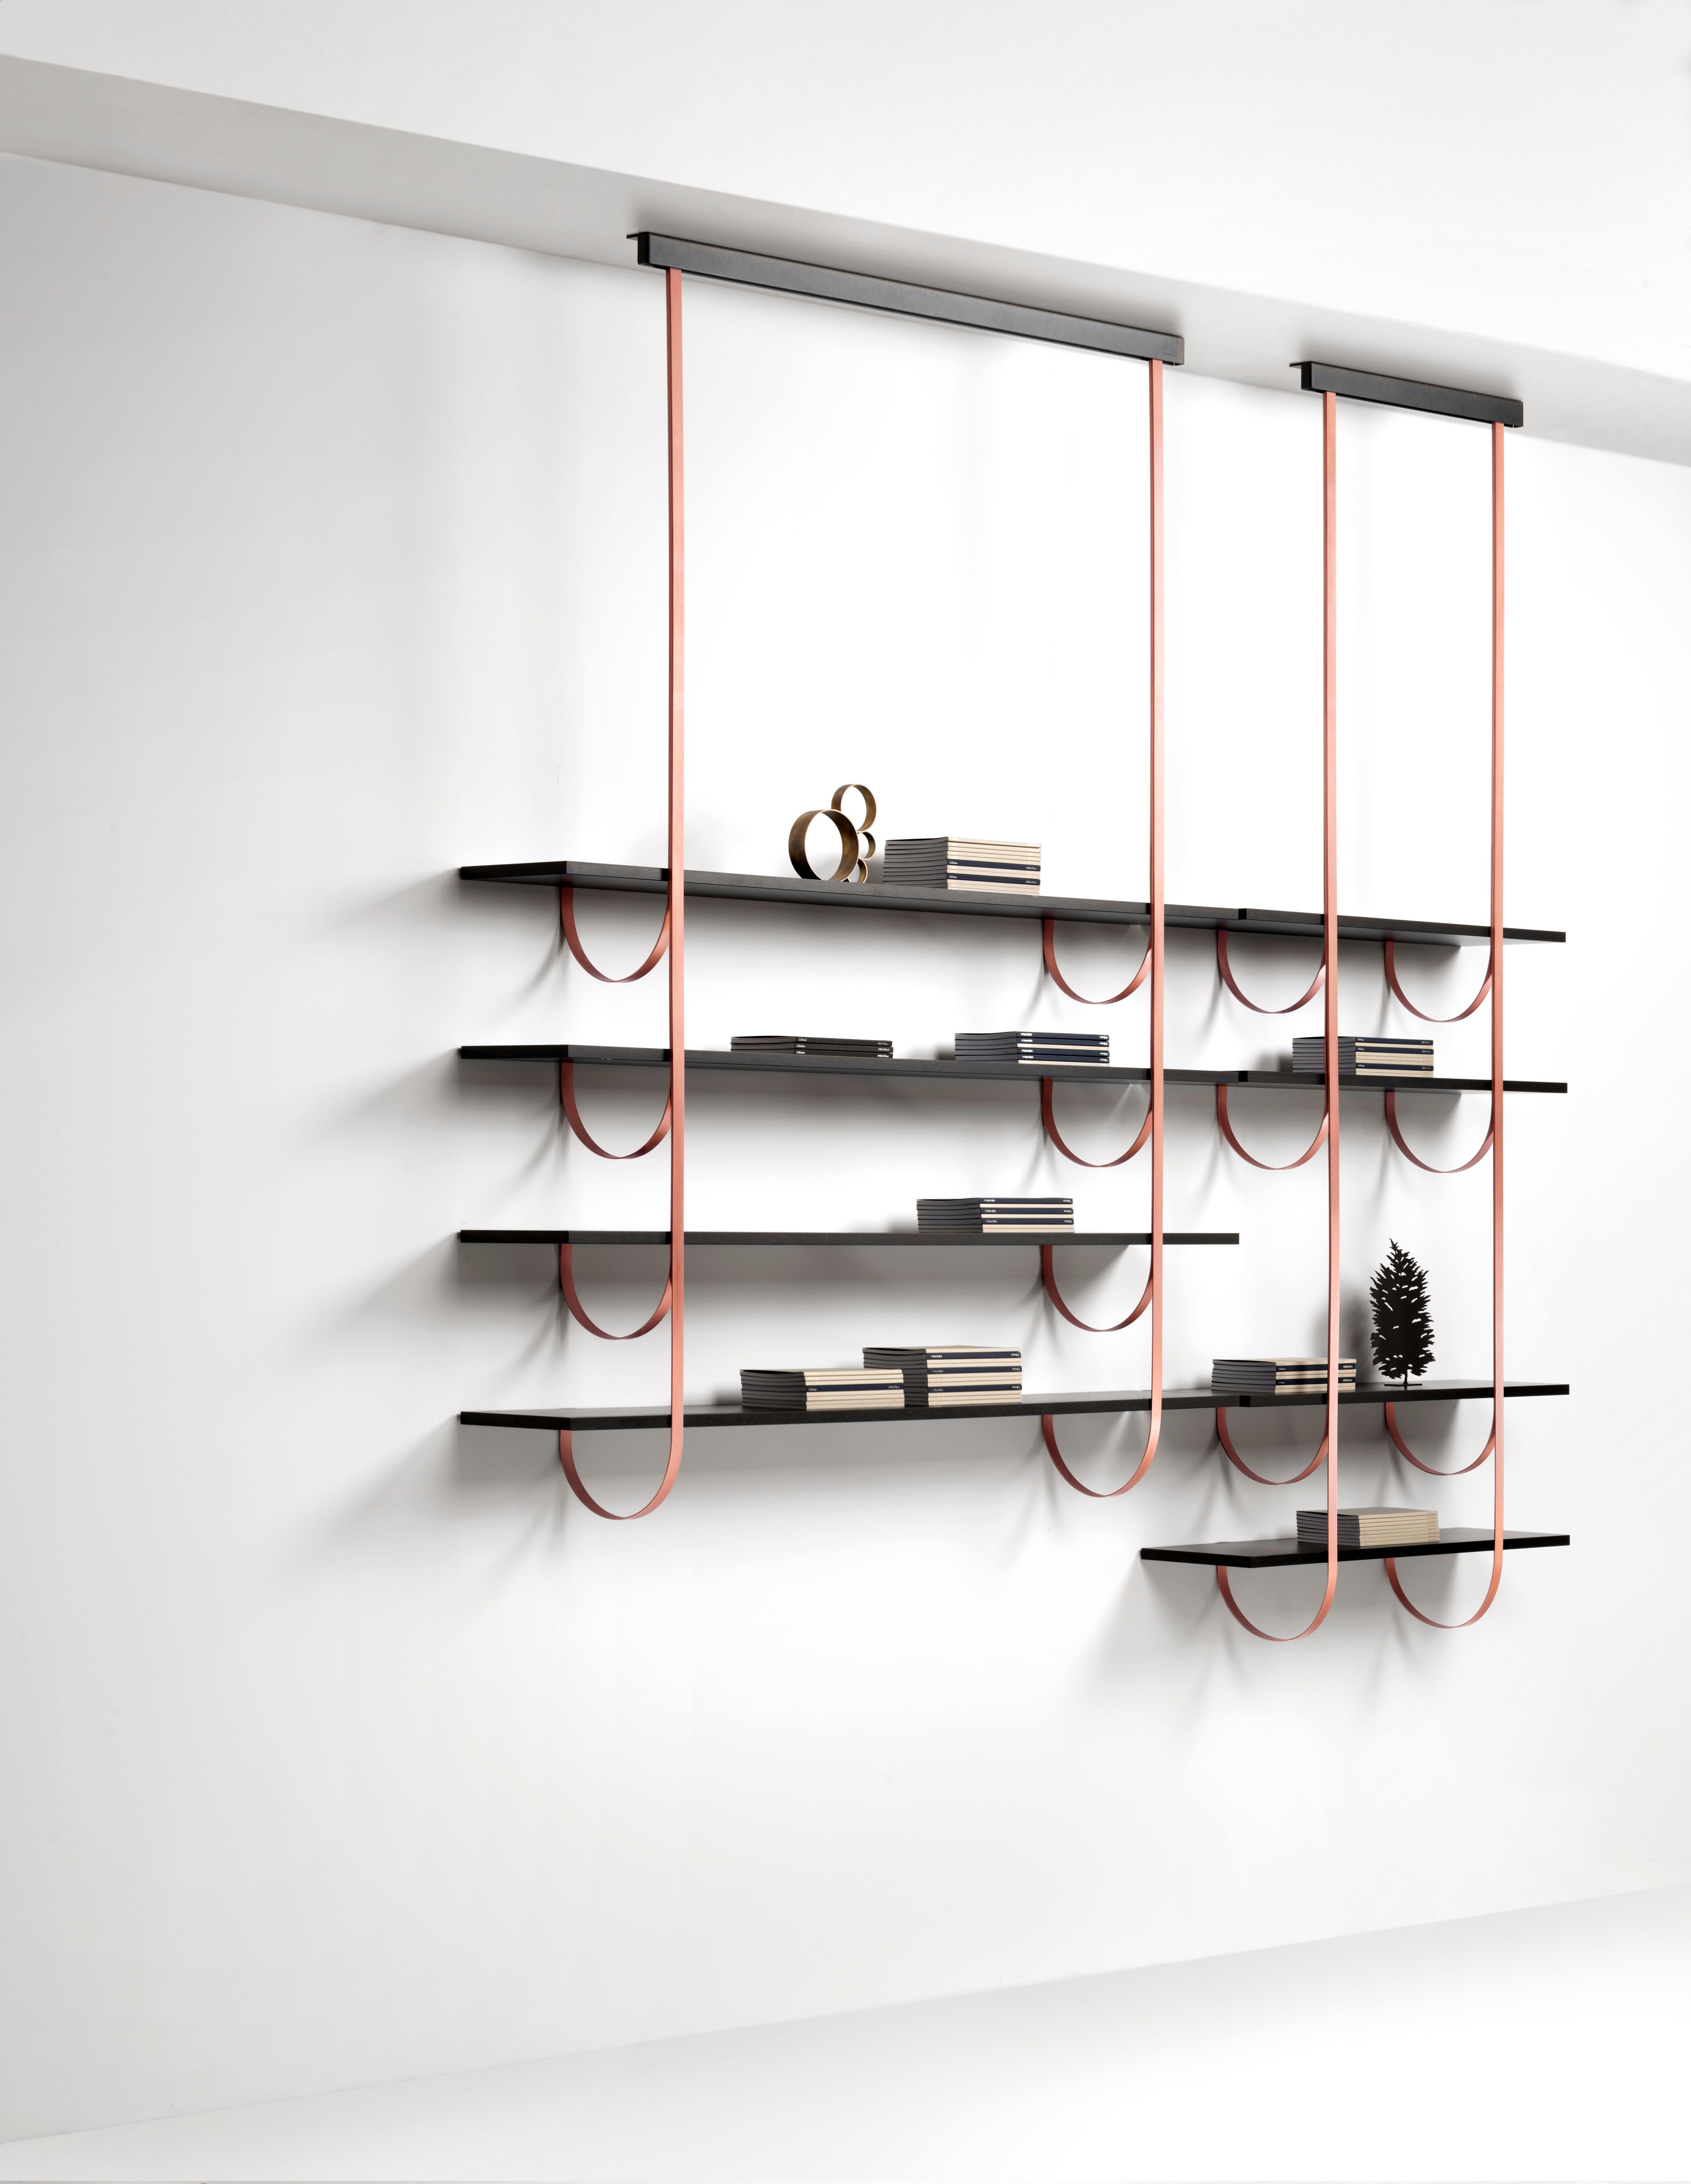 Thin perpendicular supports fall from the ceiling to be anchored to the wall in delicate curves. Like climbing vines, they create a new kind of suspended architecture. Each branch becomes a support for one or more shelves in a modular composition